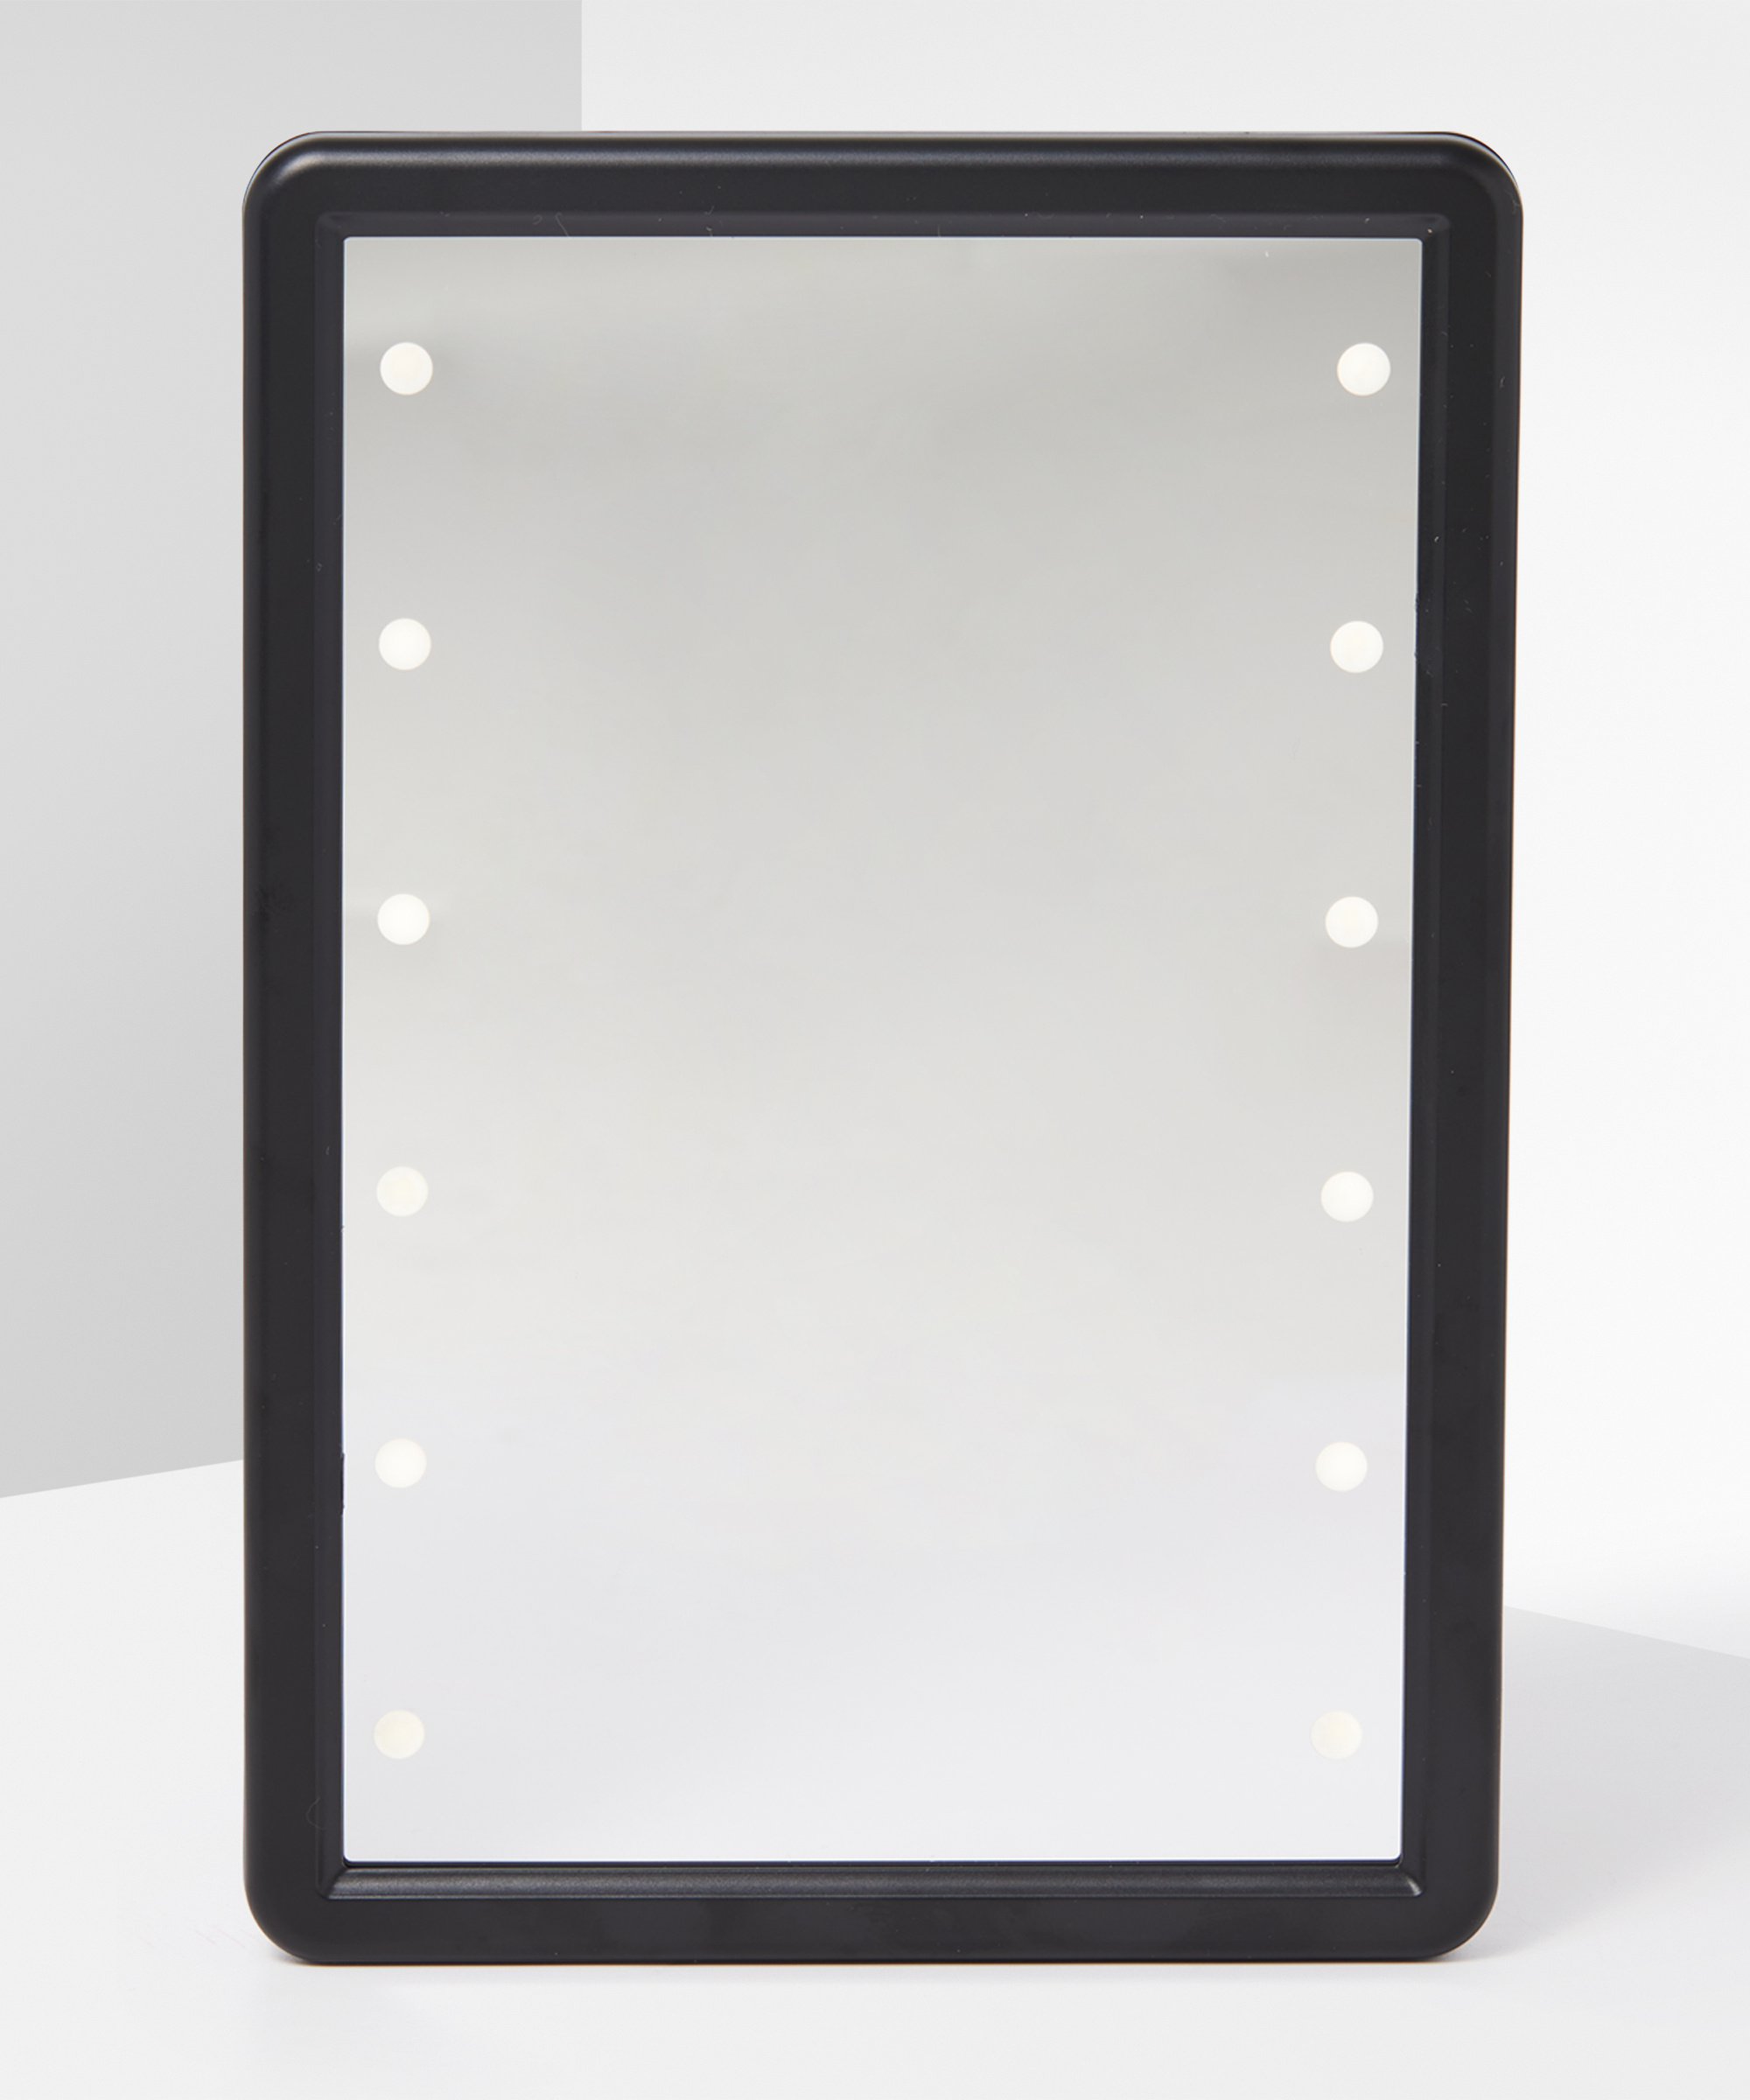 InArt LED Bathroom Makeup Vanity Mirror with Lights-Wall Mounted Back lit  Mirror,Led Touch Mirror, Bathroom Lighted Mirror Round Lighted Mirror Price  in India - Buy InArt LED Bathroom Makeup Vanity Mirror with